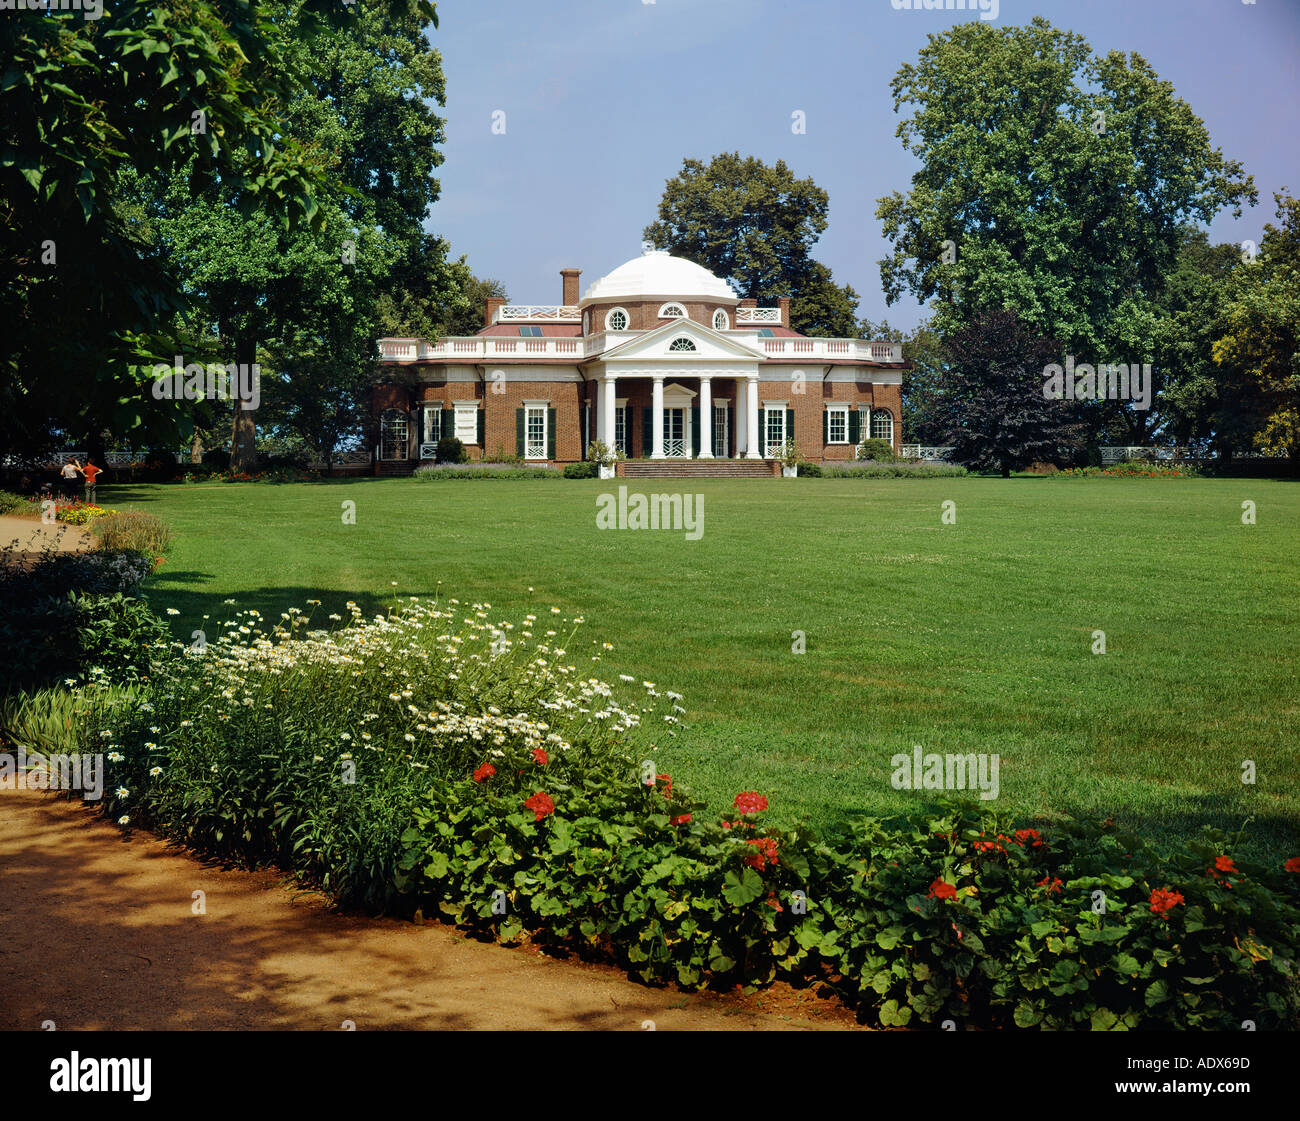 Monticello Virginia home of Americas third president Thomas Jefferson author of the Declaration of Independence Stock Photo